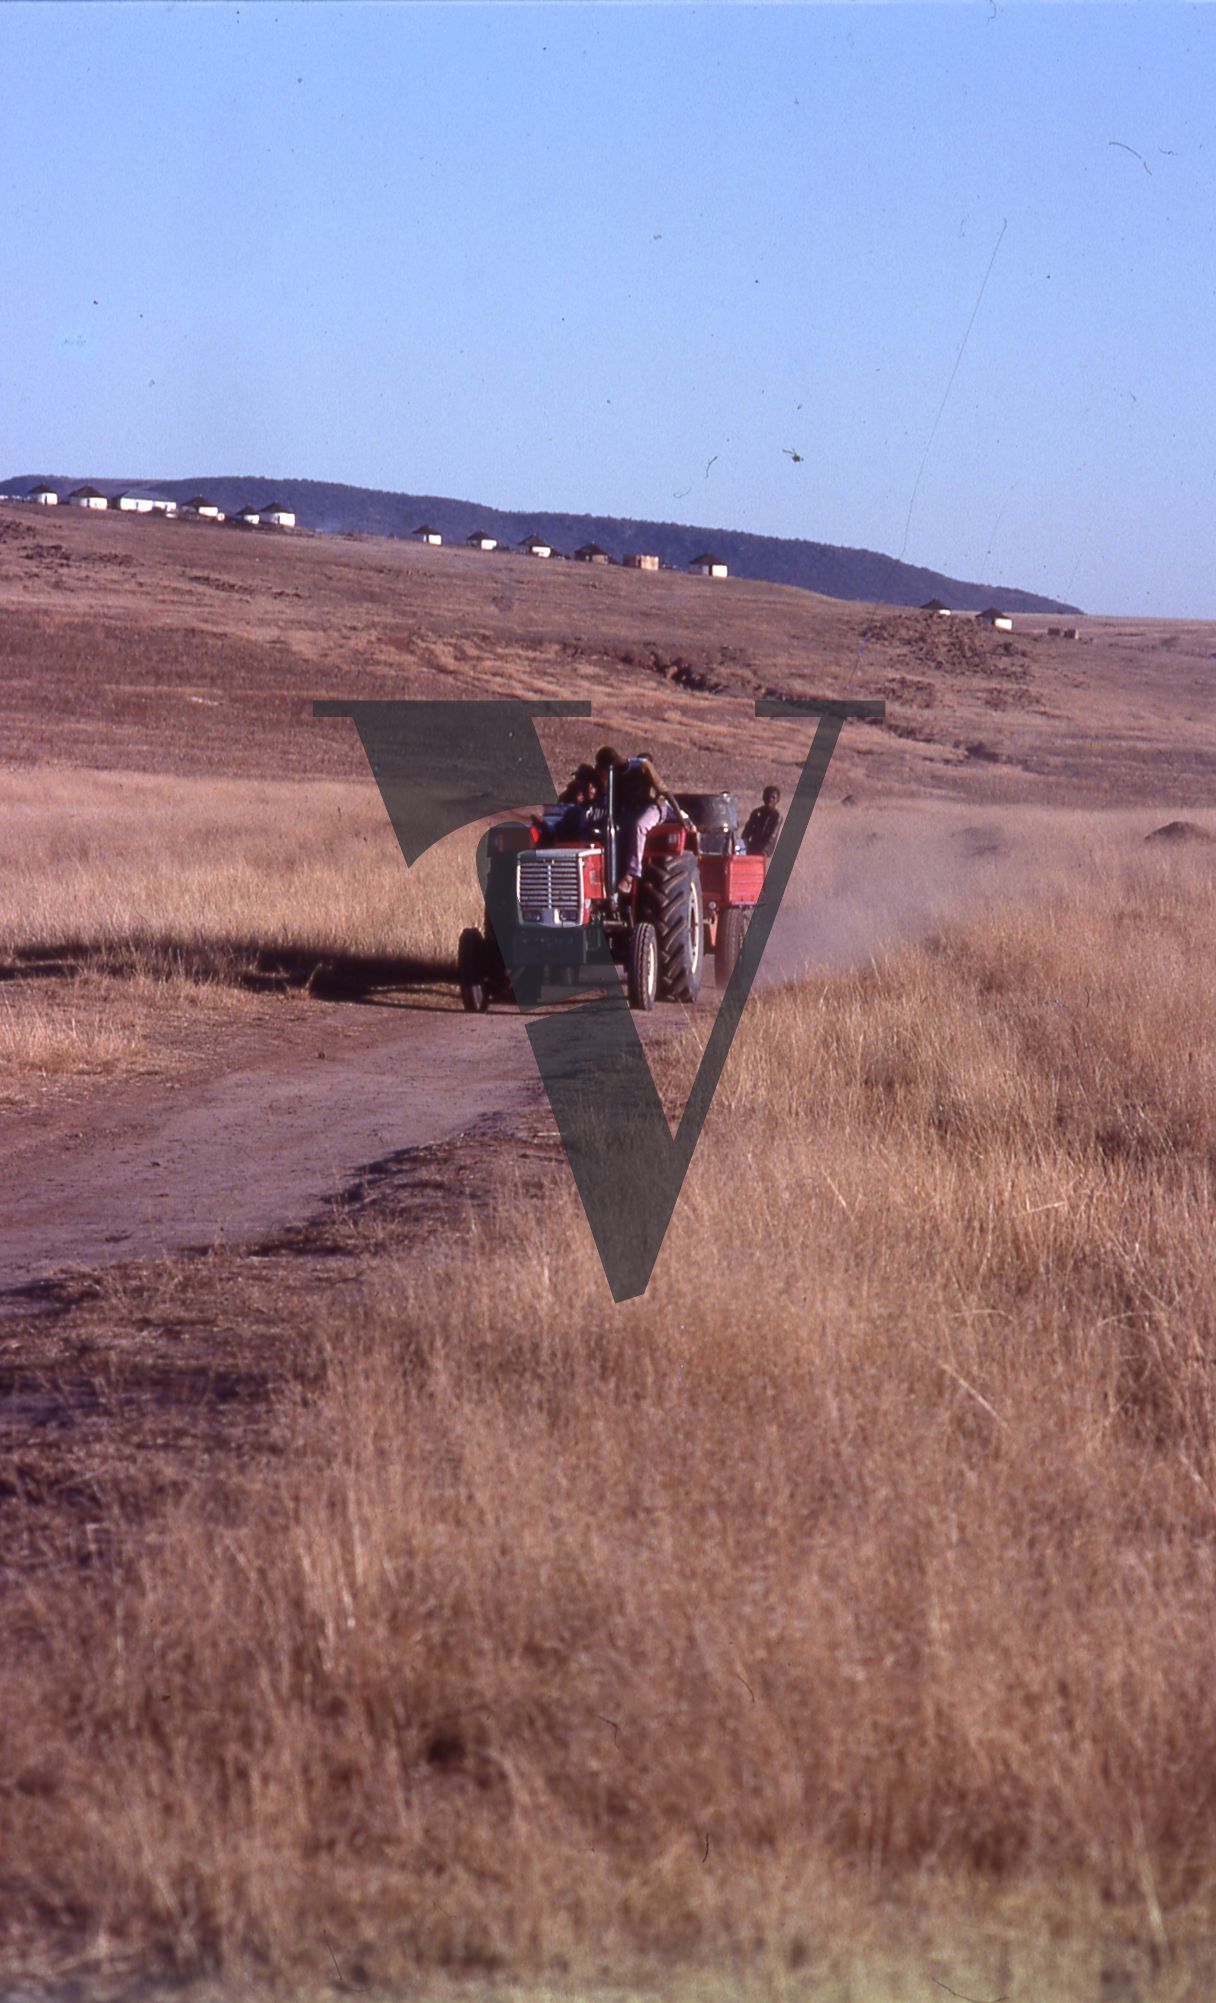 South Africa, Transkei, landscape, men on a tractor, uRonta, traditional Xhosa hut, long shot.